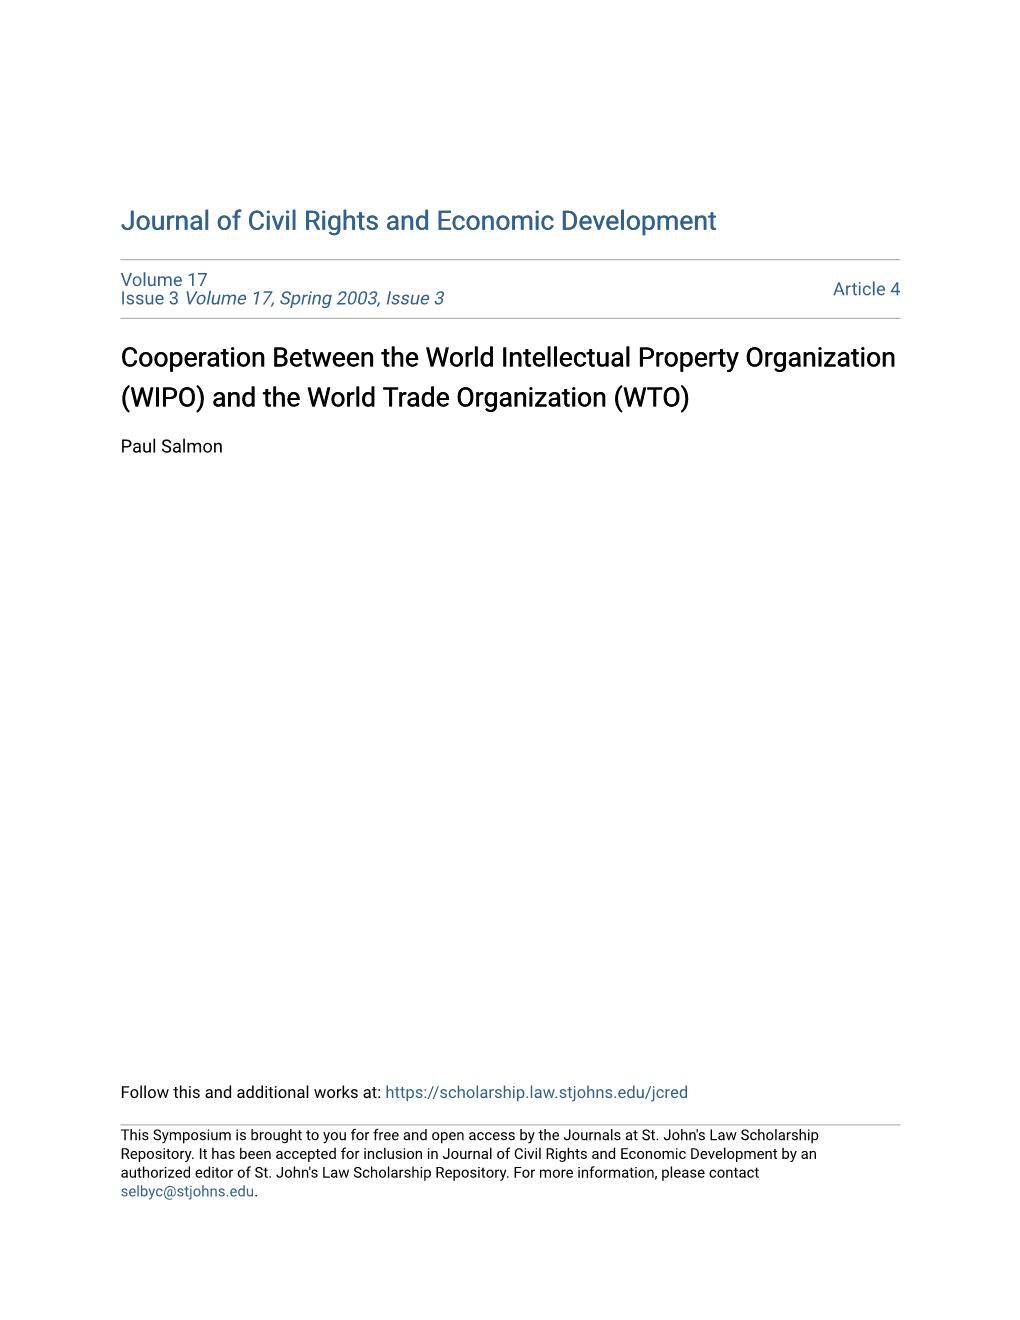 Cooperation Between the World Intellectual Property Organization (WIPO) and the World Trade Organization (WTO)